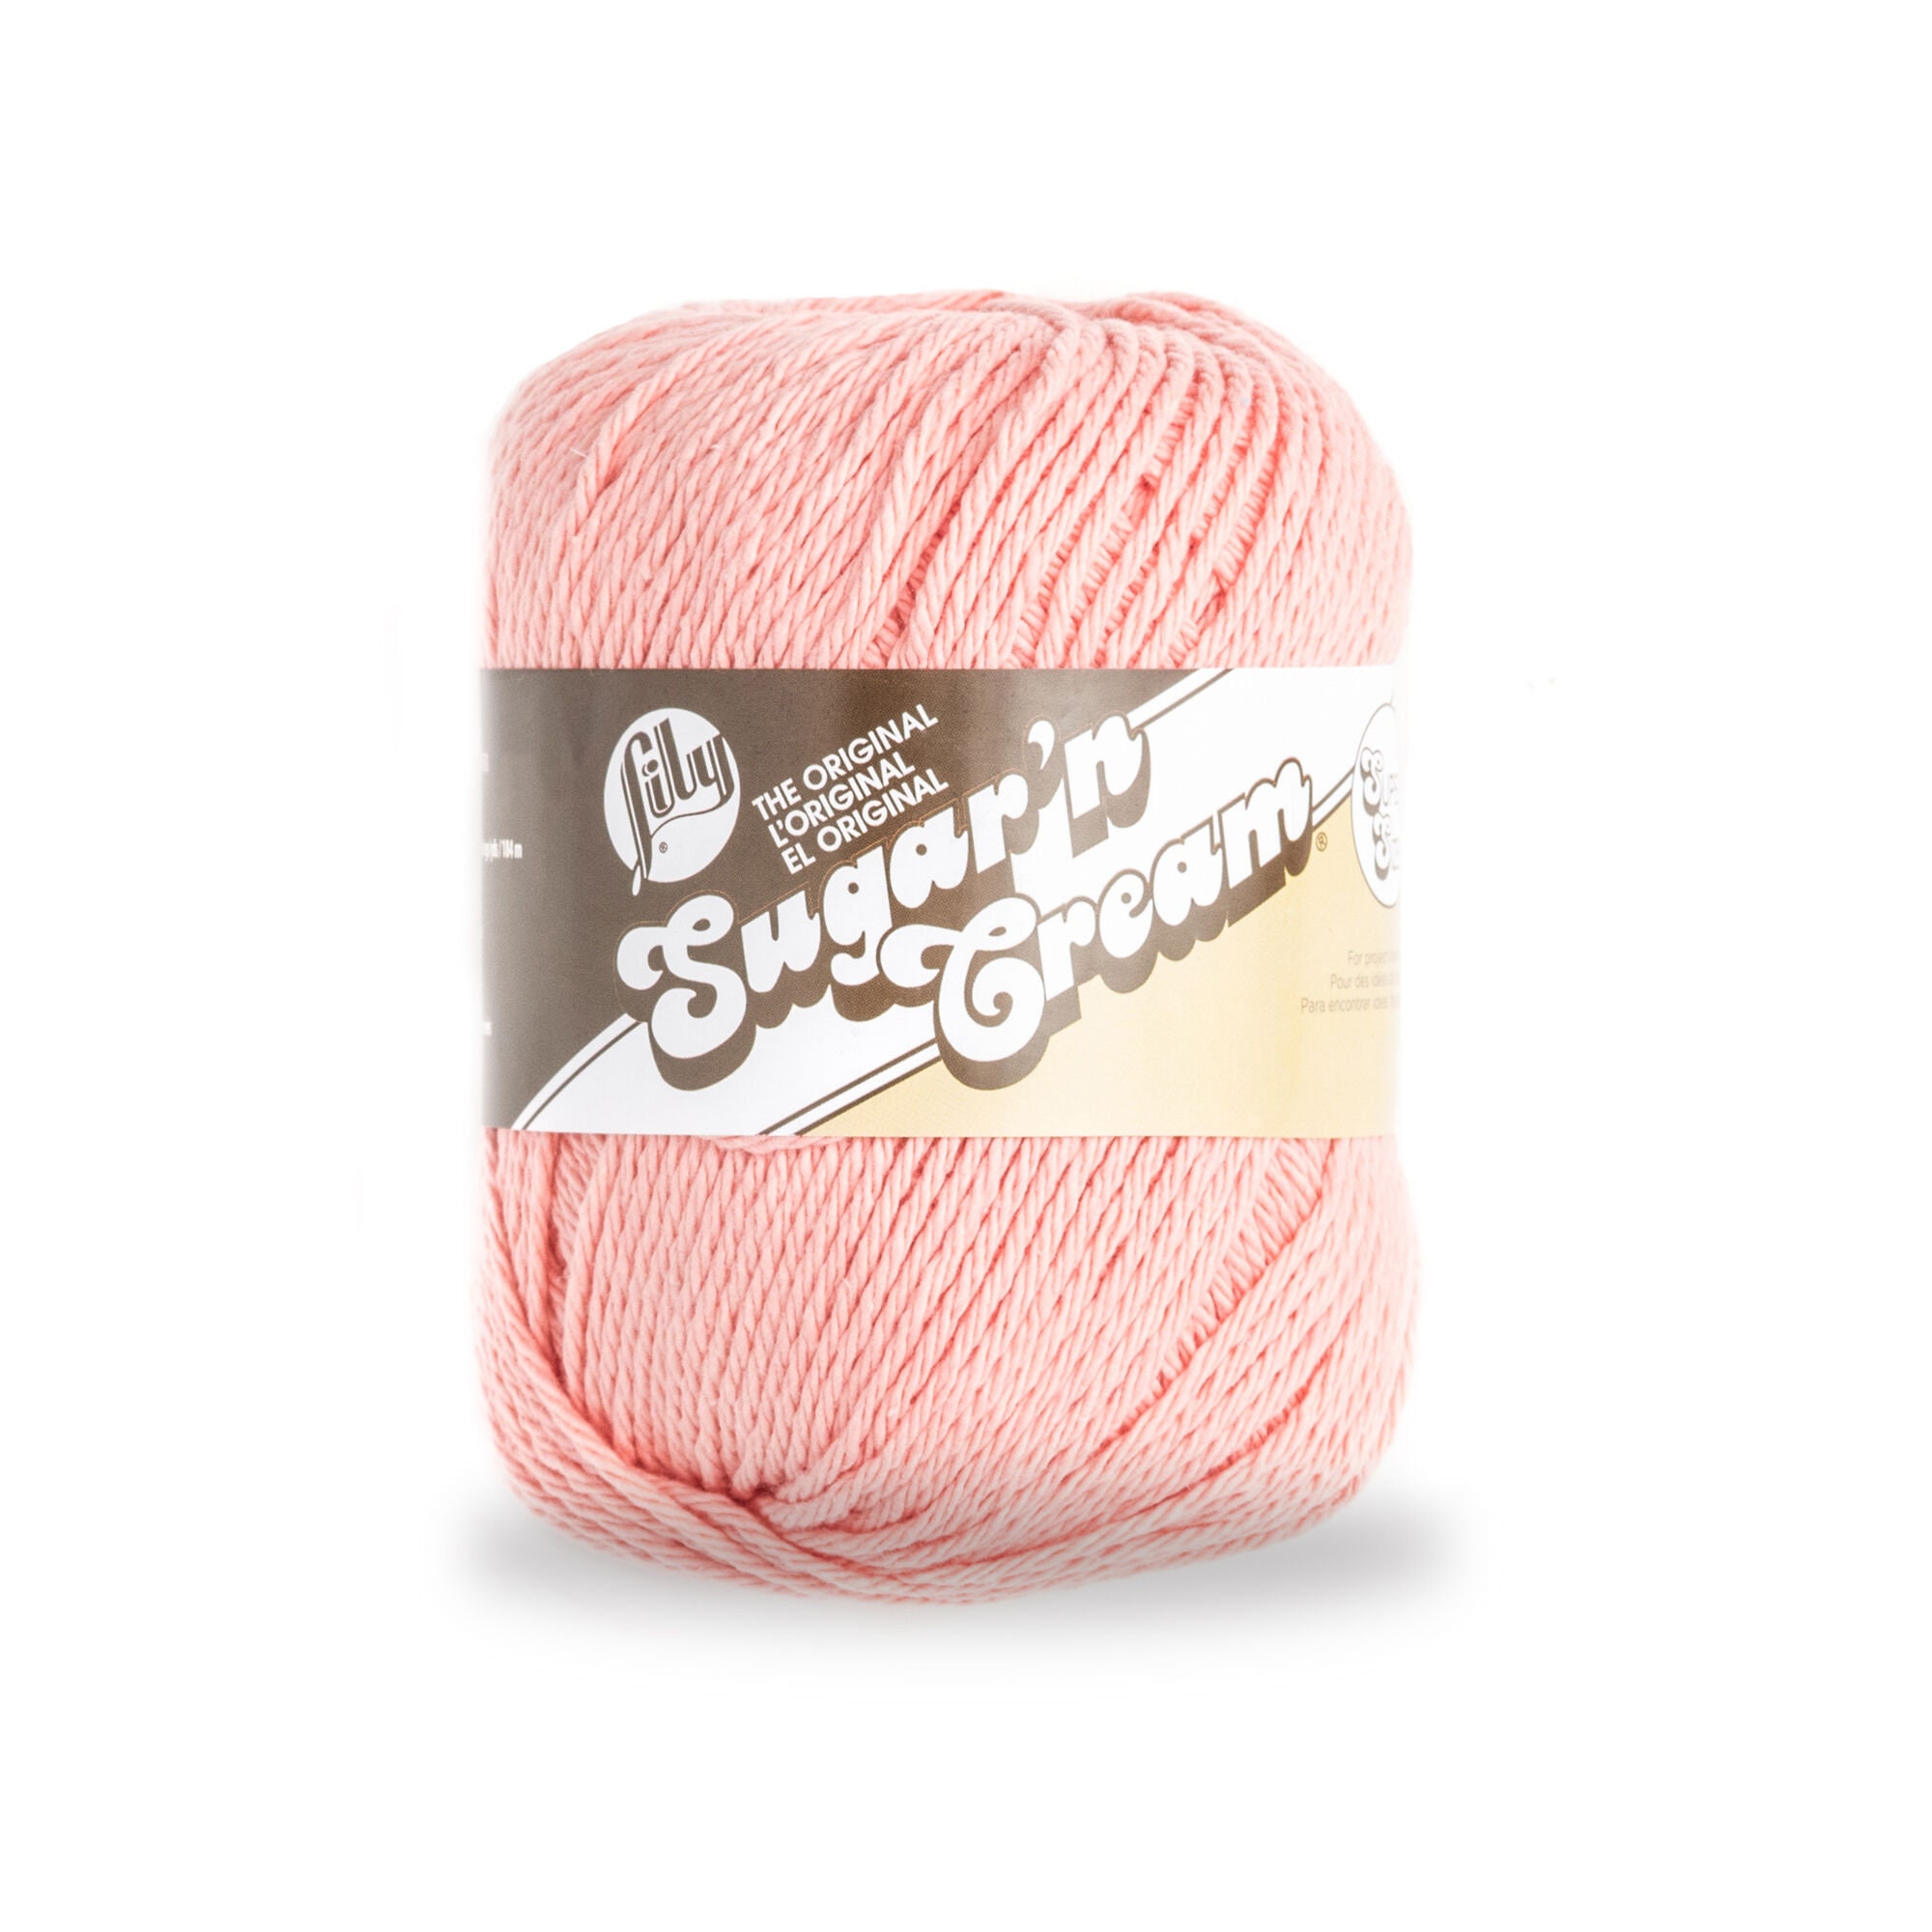 Lily Sugar'n Cream Yarn - Solids Super Size-Hot Pink, 1 count